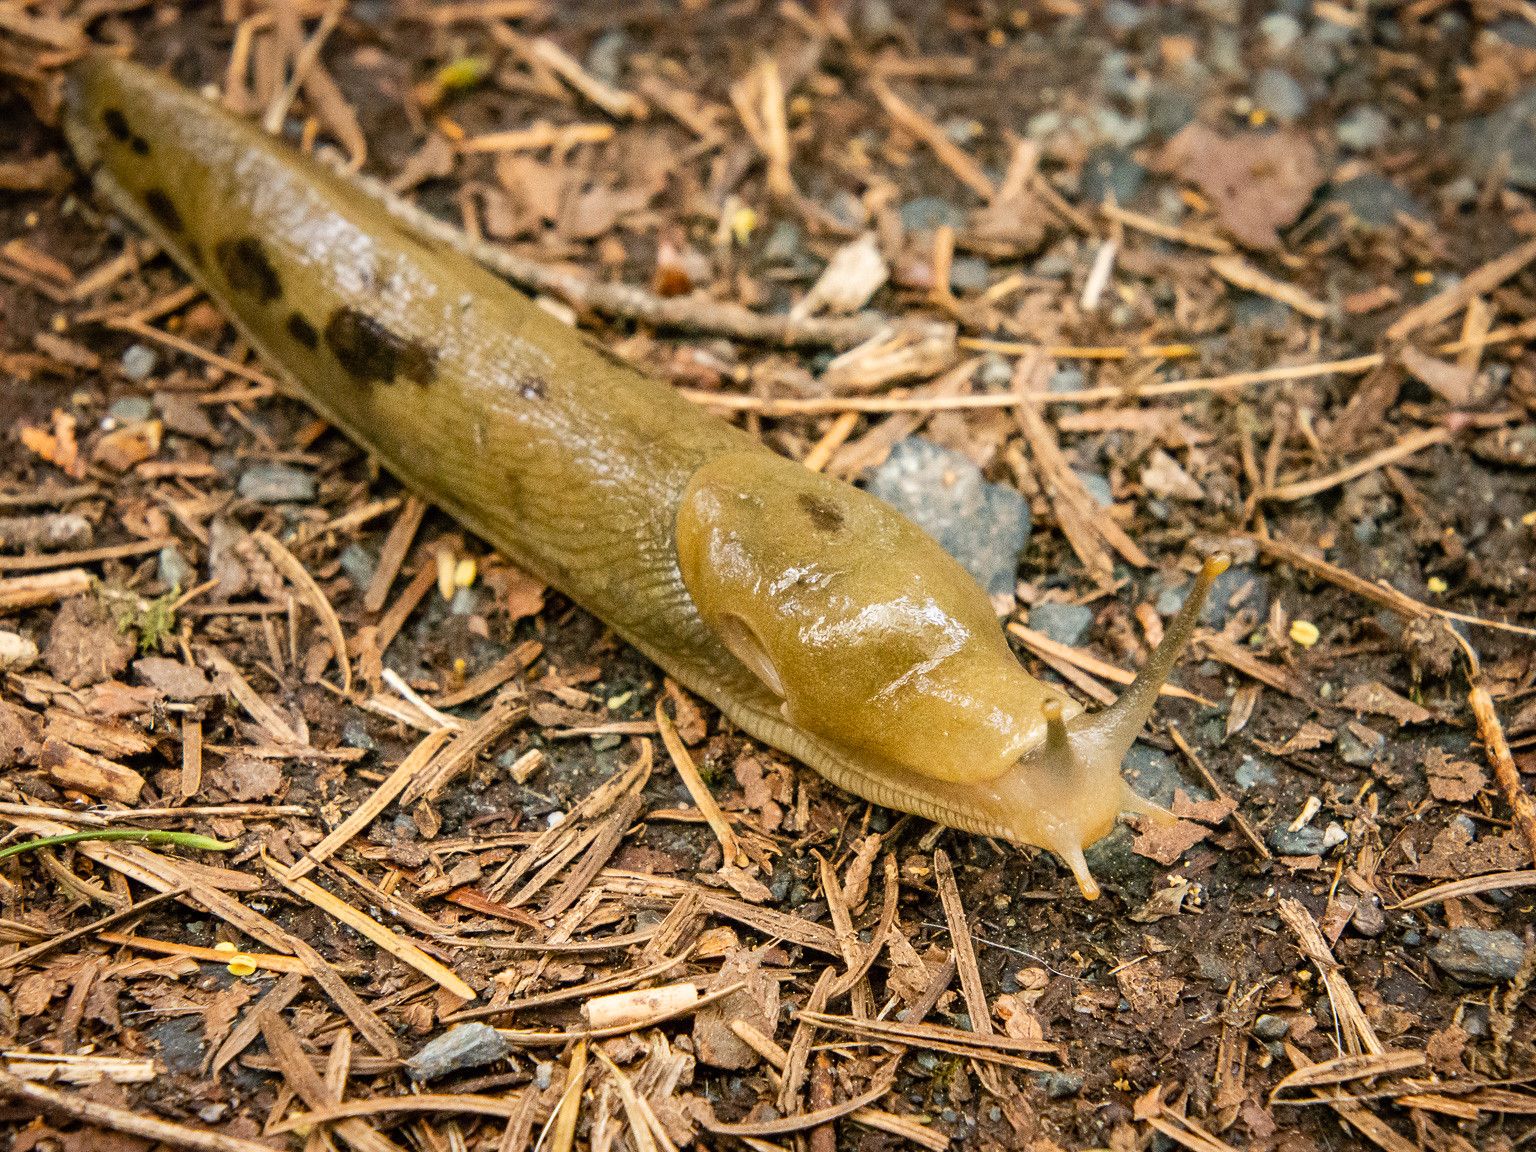 Surprising Facts About Slugs and Snails